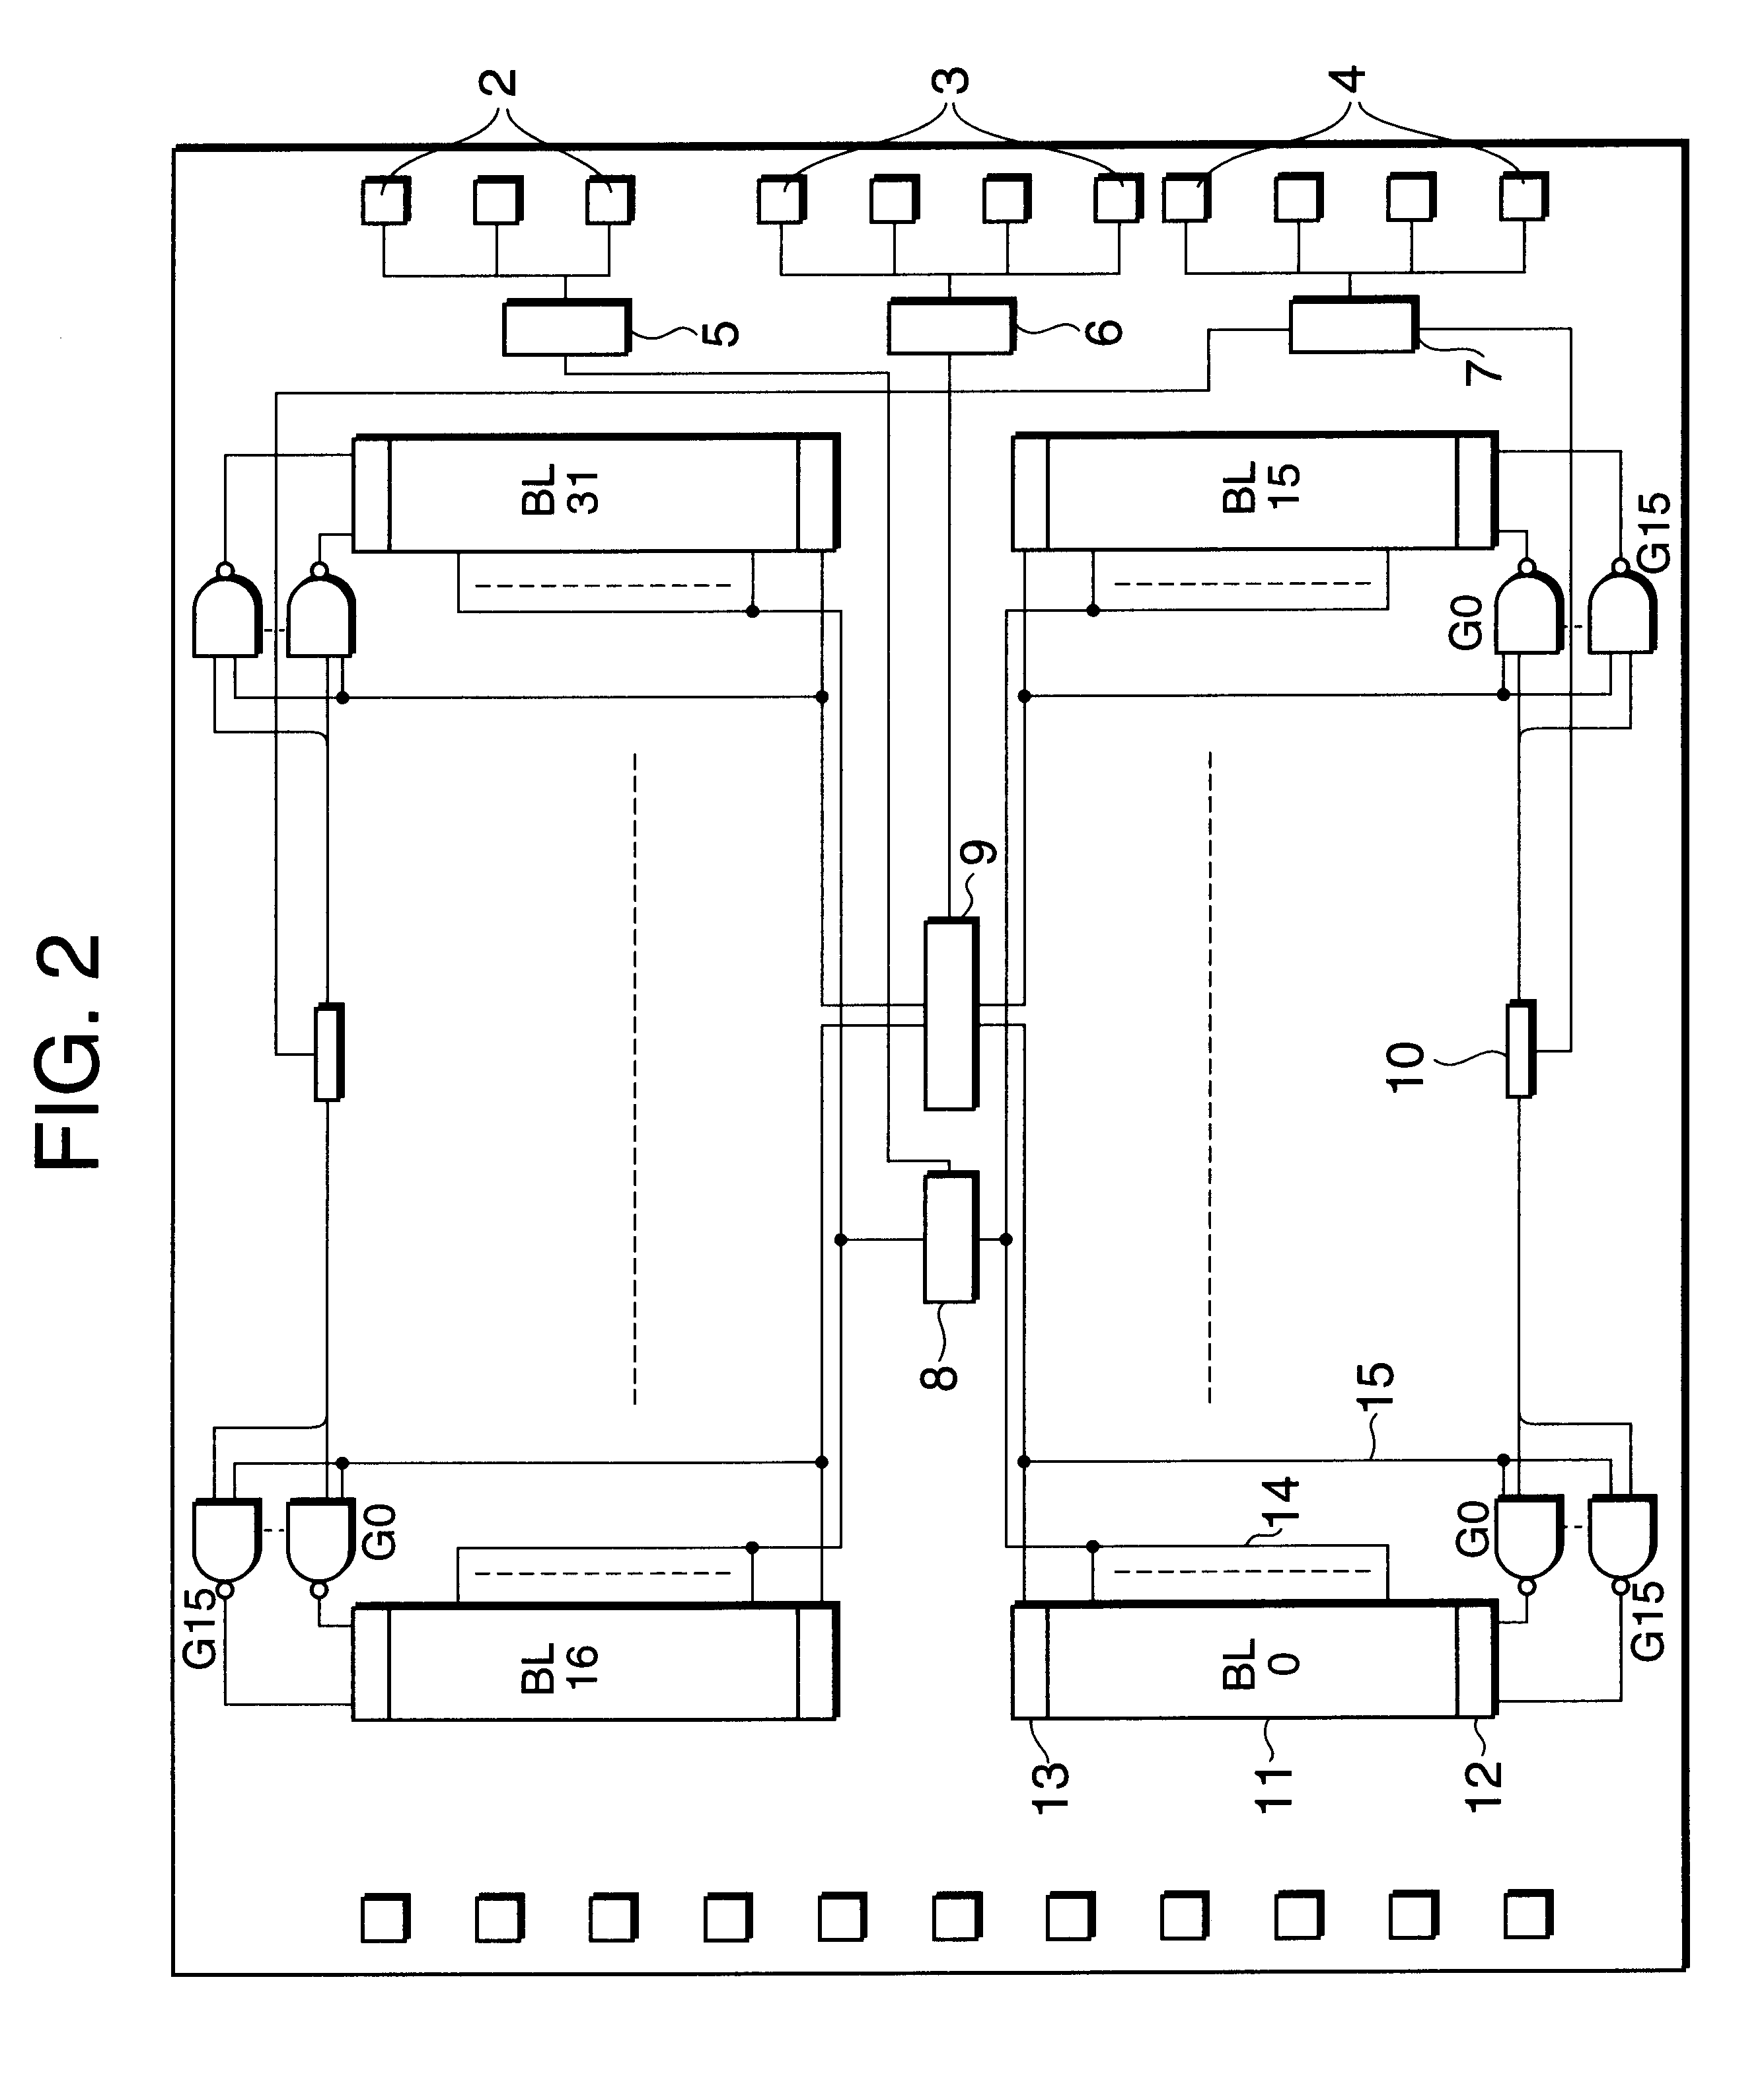 Semiconductor memory device improving data read-out access